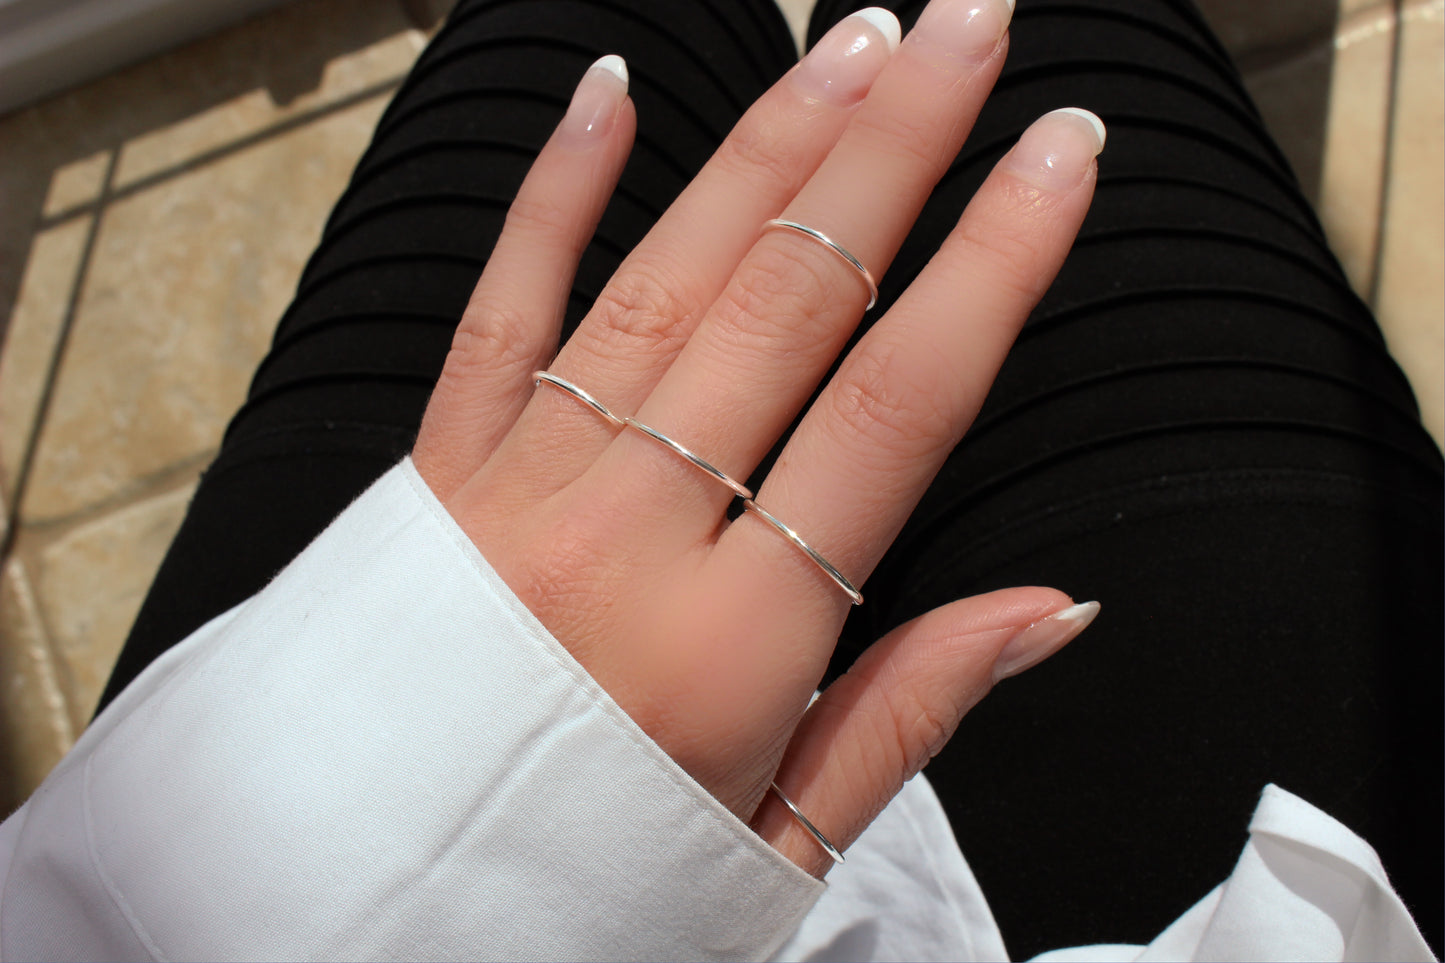 1x Pure Silvery and Shiny Minimalist Ring ∙ High Quality Waterproof & Tarnish Free ∙ Statement Ring ∙ Simple Delicate Thin Band Ring